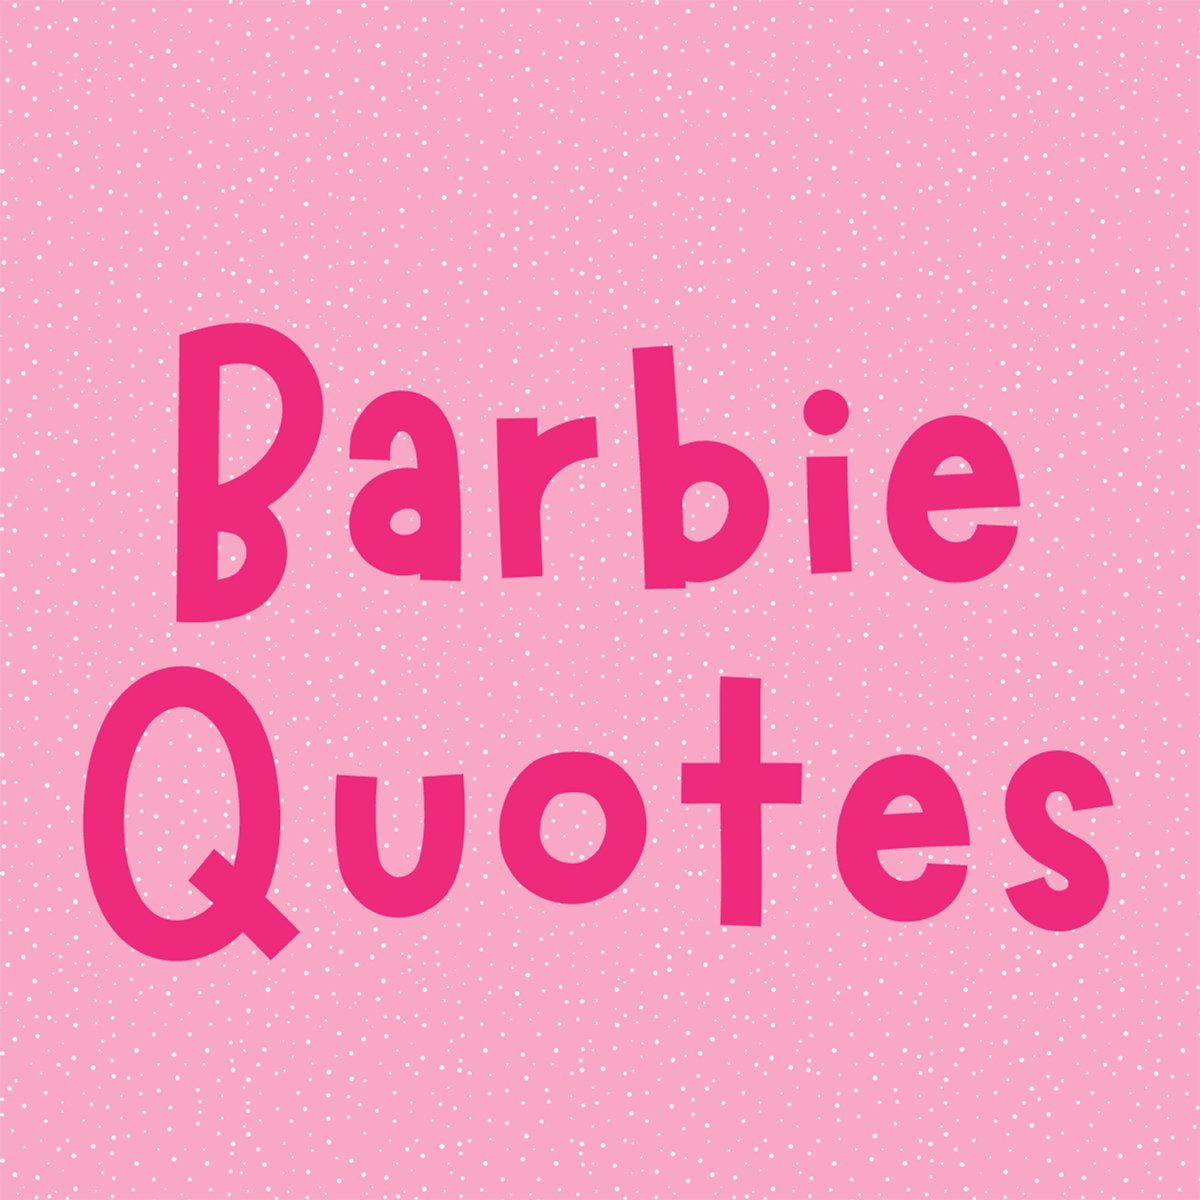 83 Inspirational Barbie Quotes & Dream house Captions - Darling Quote